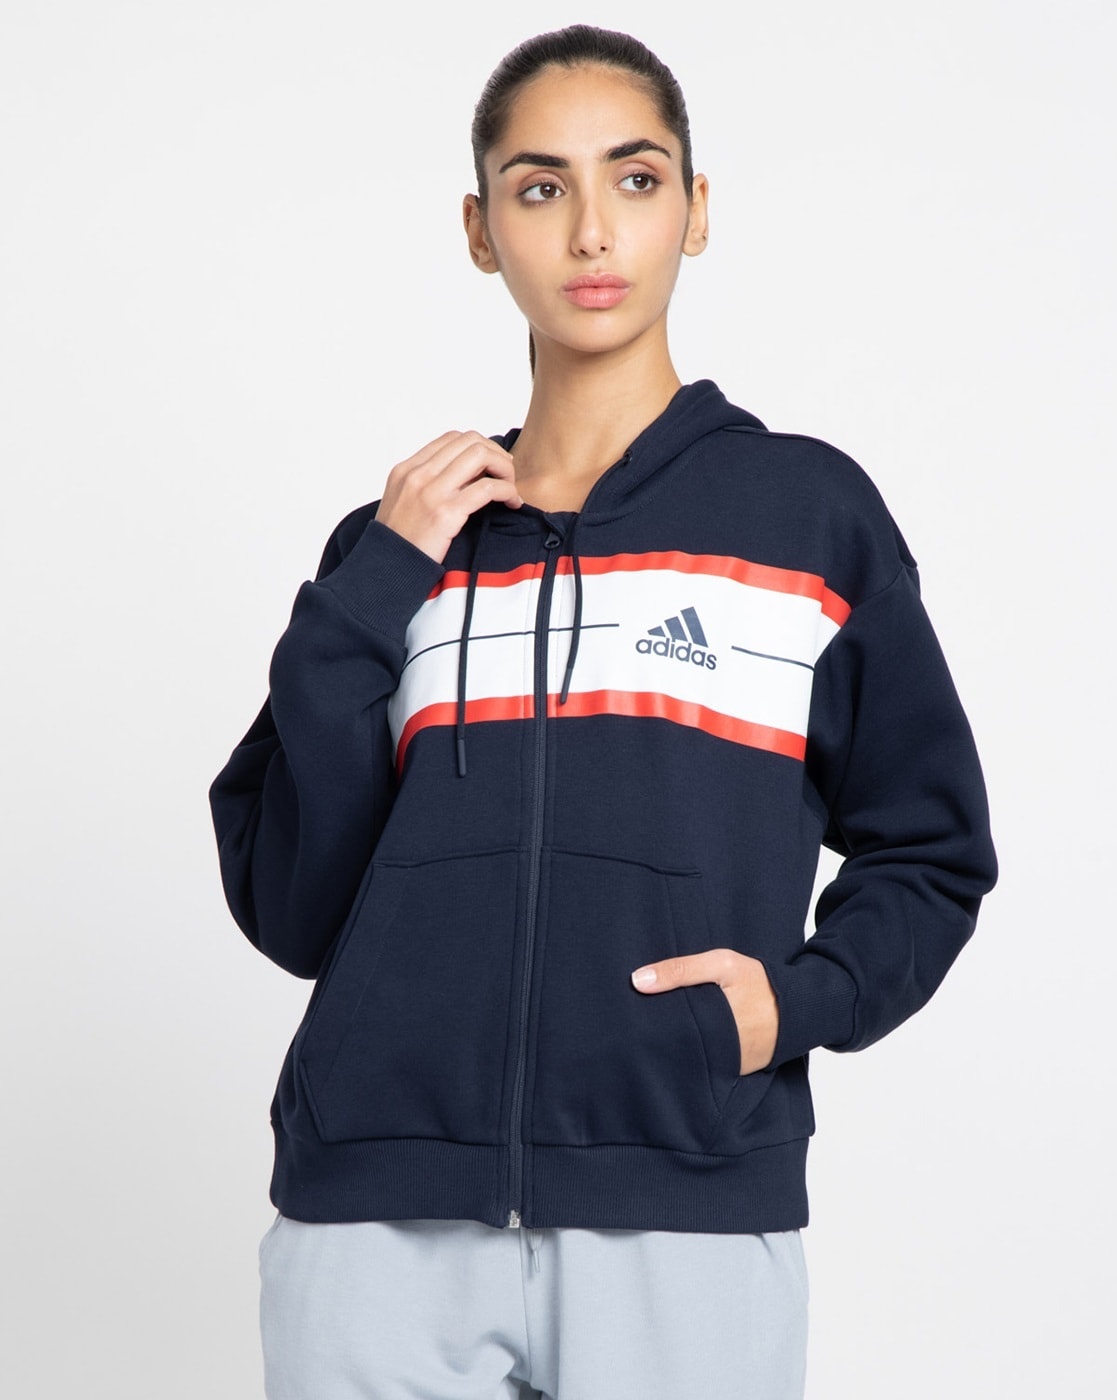 & Jackets Blue by Coats Buy for Women Navy Online ADIDAS